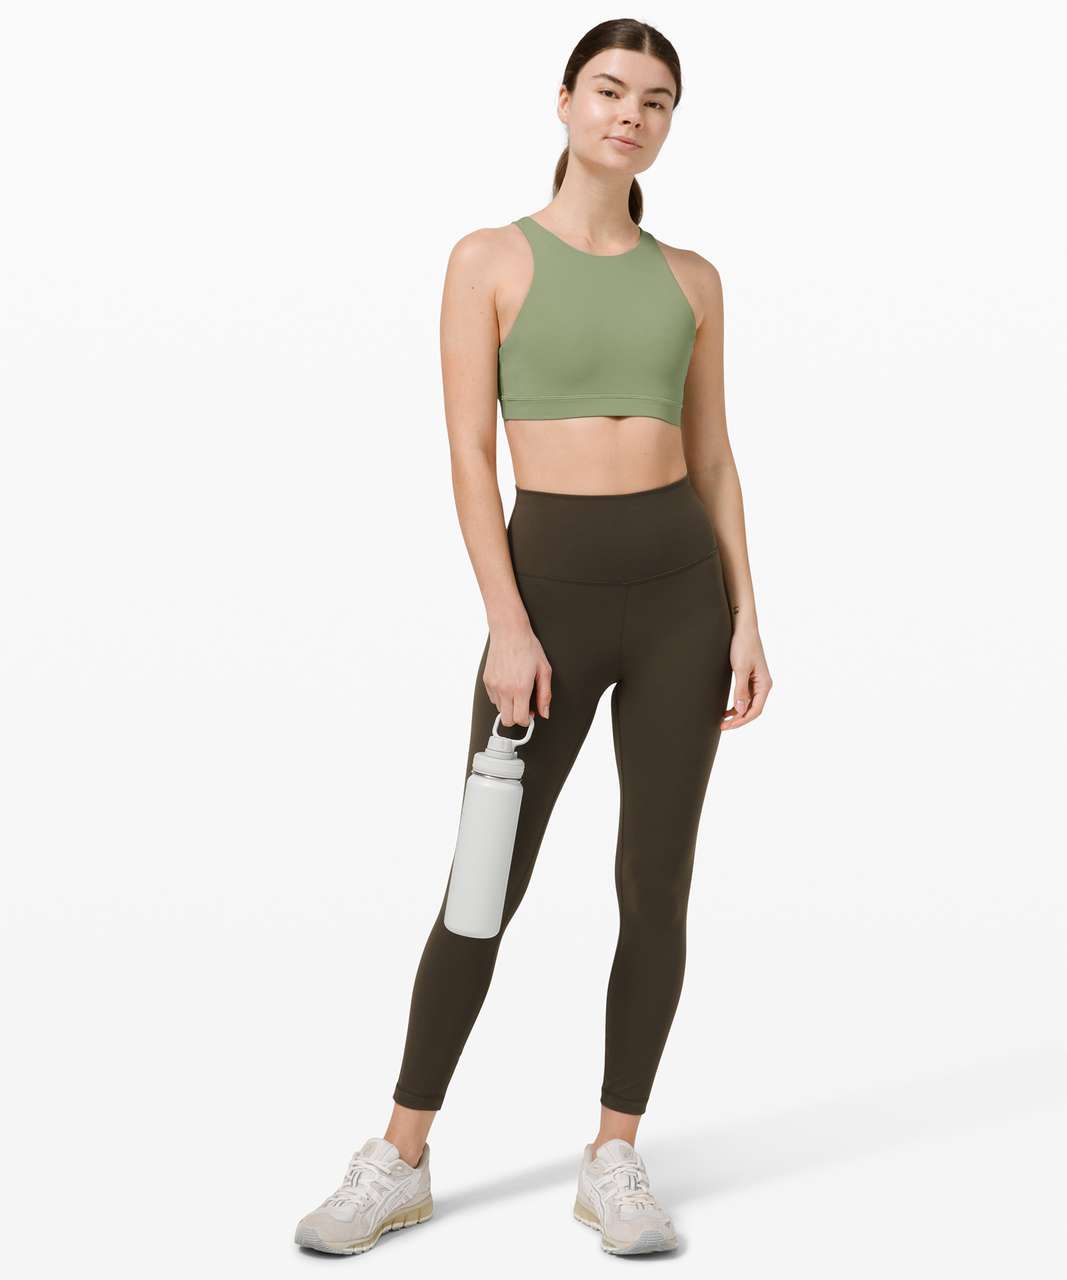 Had a great leg day in these lululemon InStill HR tights and Energy Bra  High Neck : r/lululemon